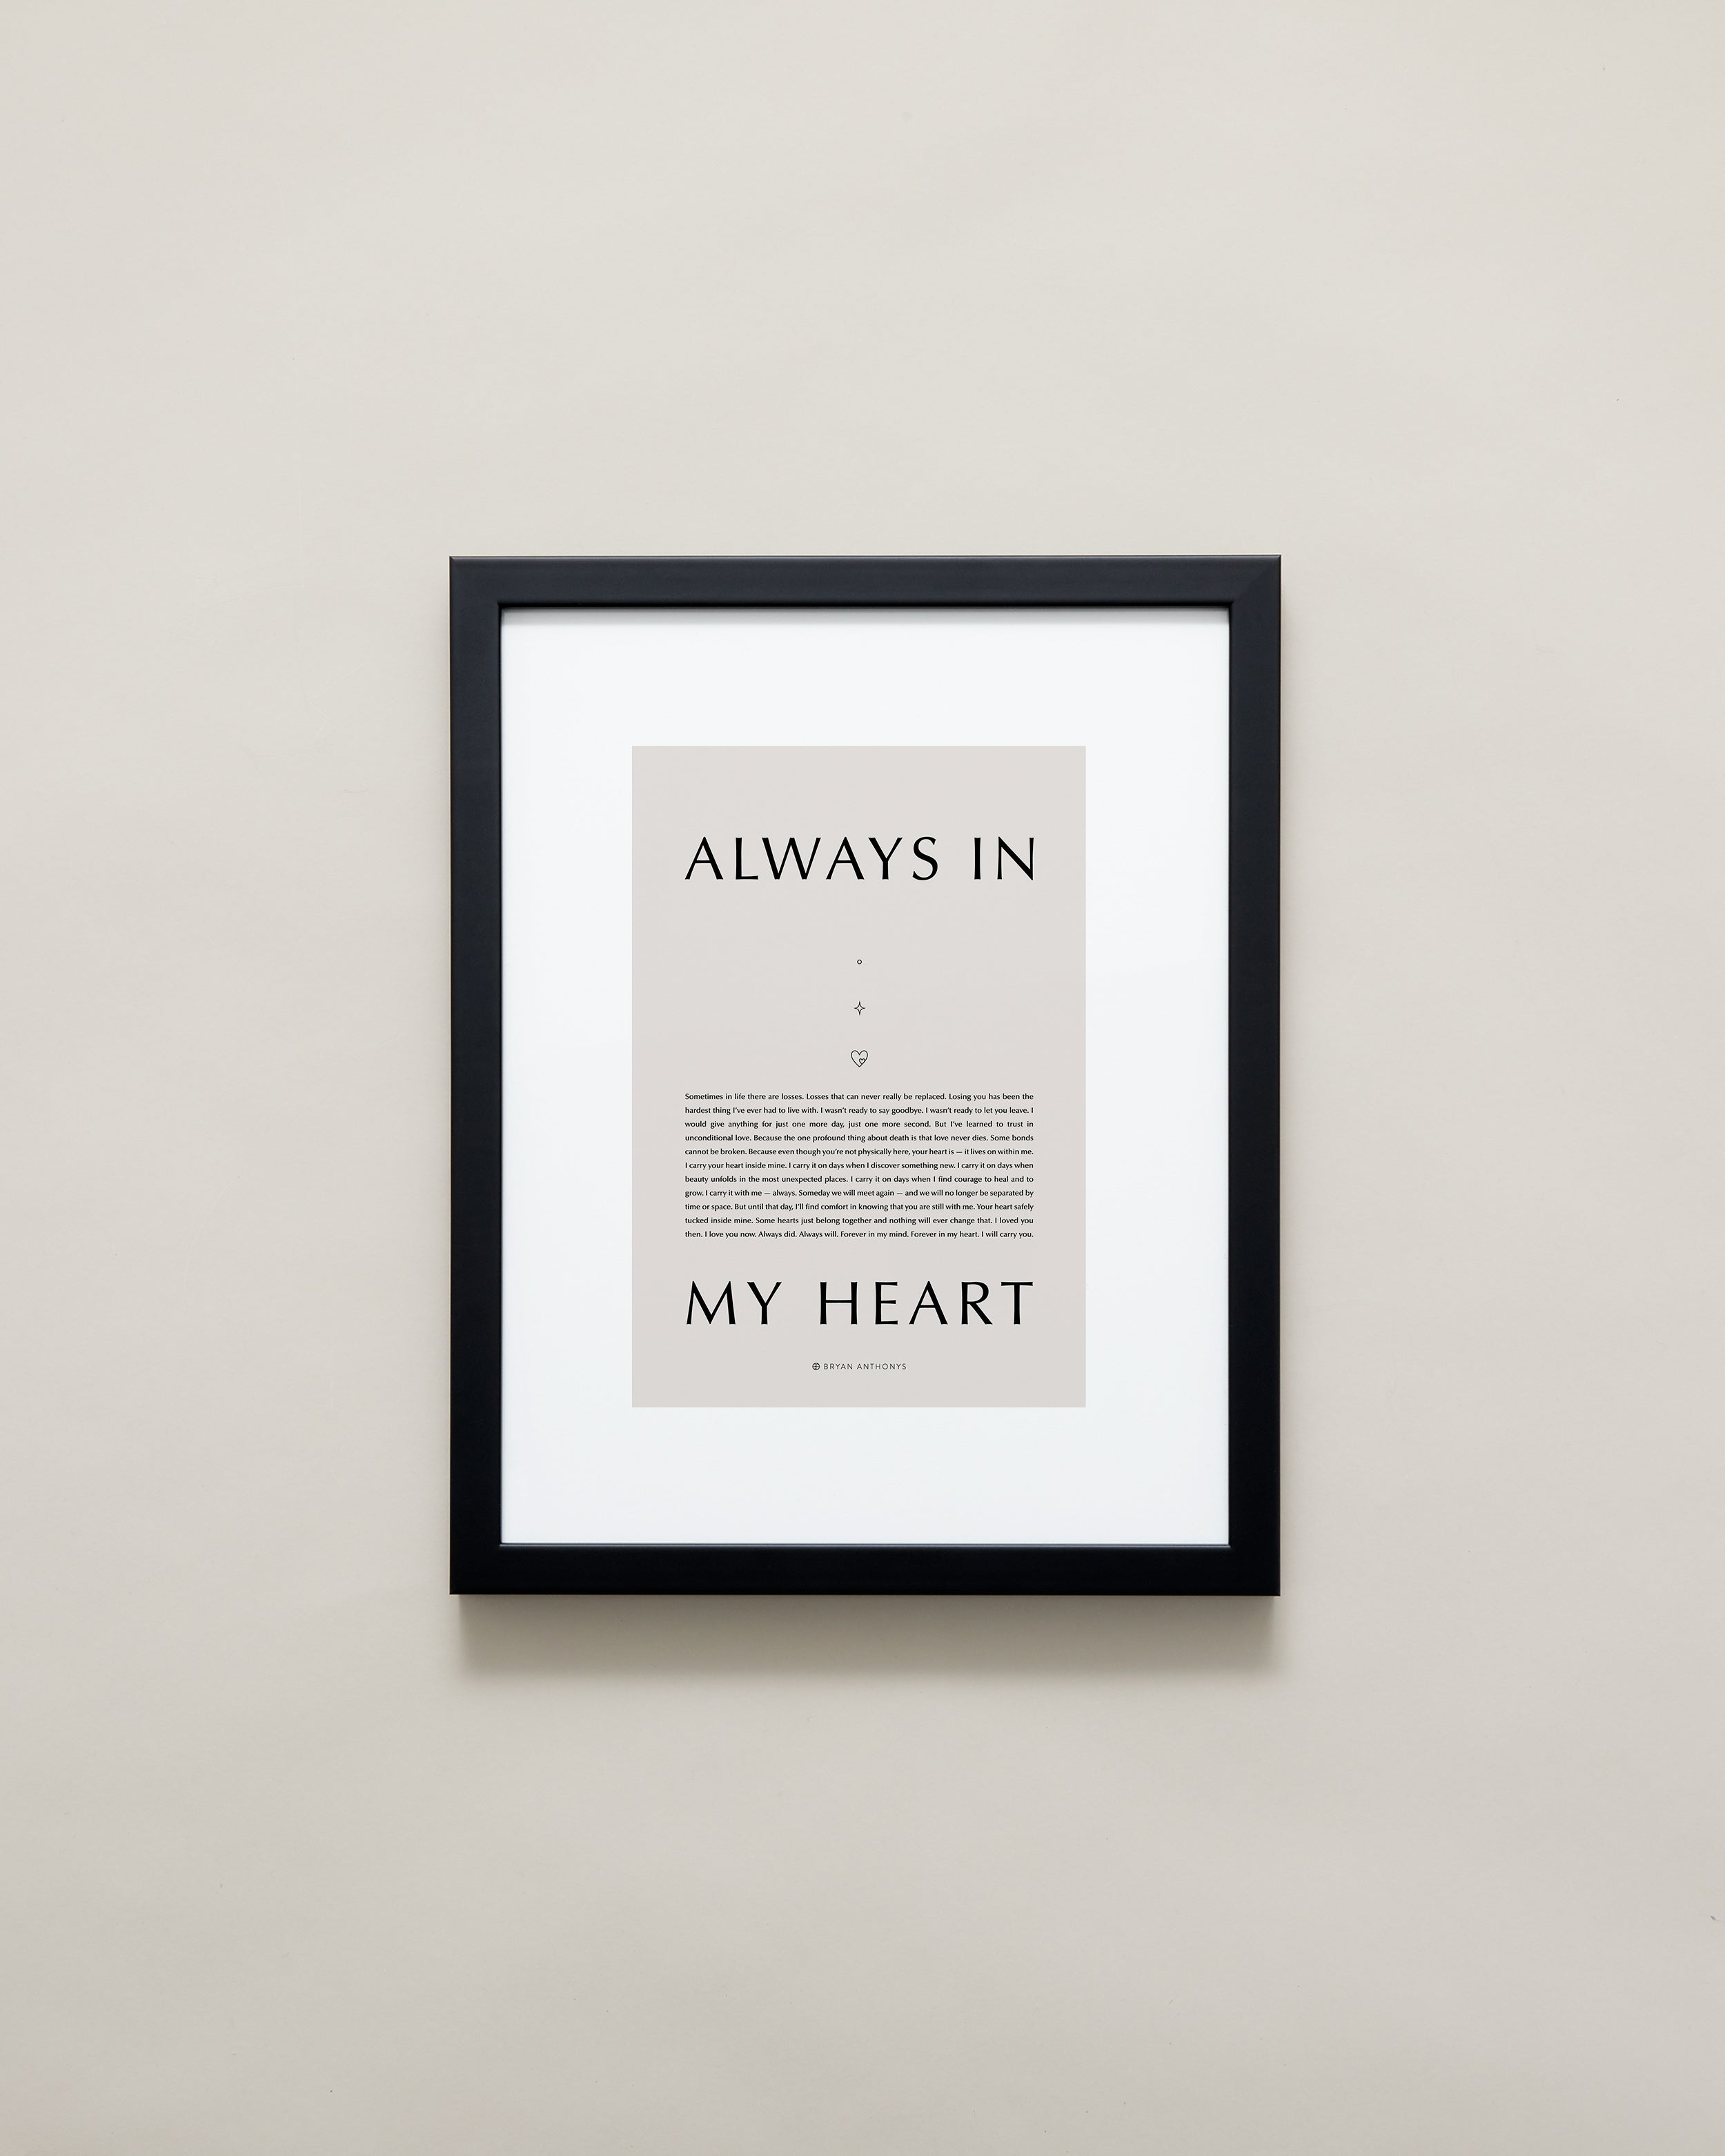 Bryan Anthonys Home Decor Purposeful Prints Always In My Heart Iconic Framed Print Tan Art With Black Frame 11x14